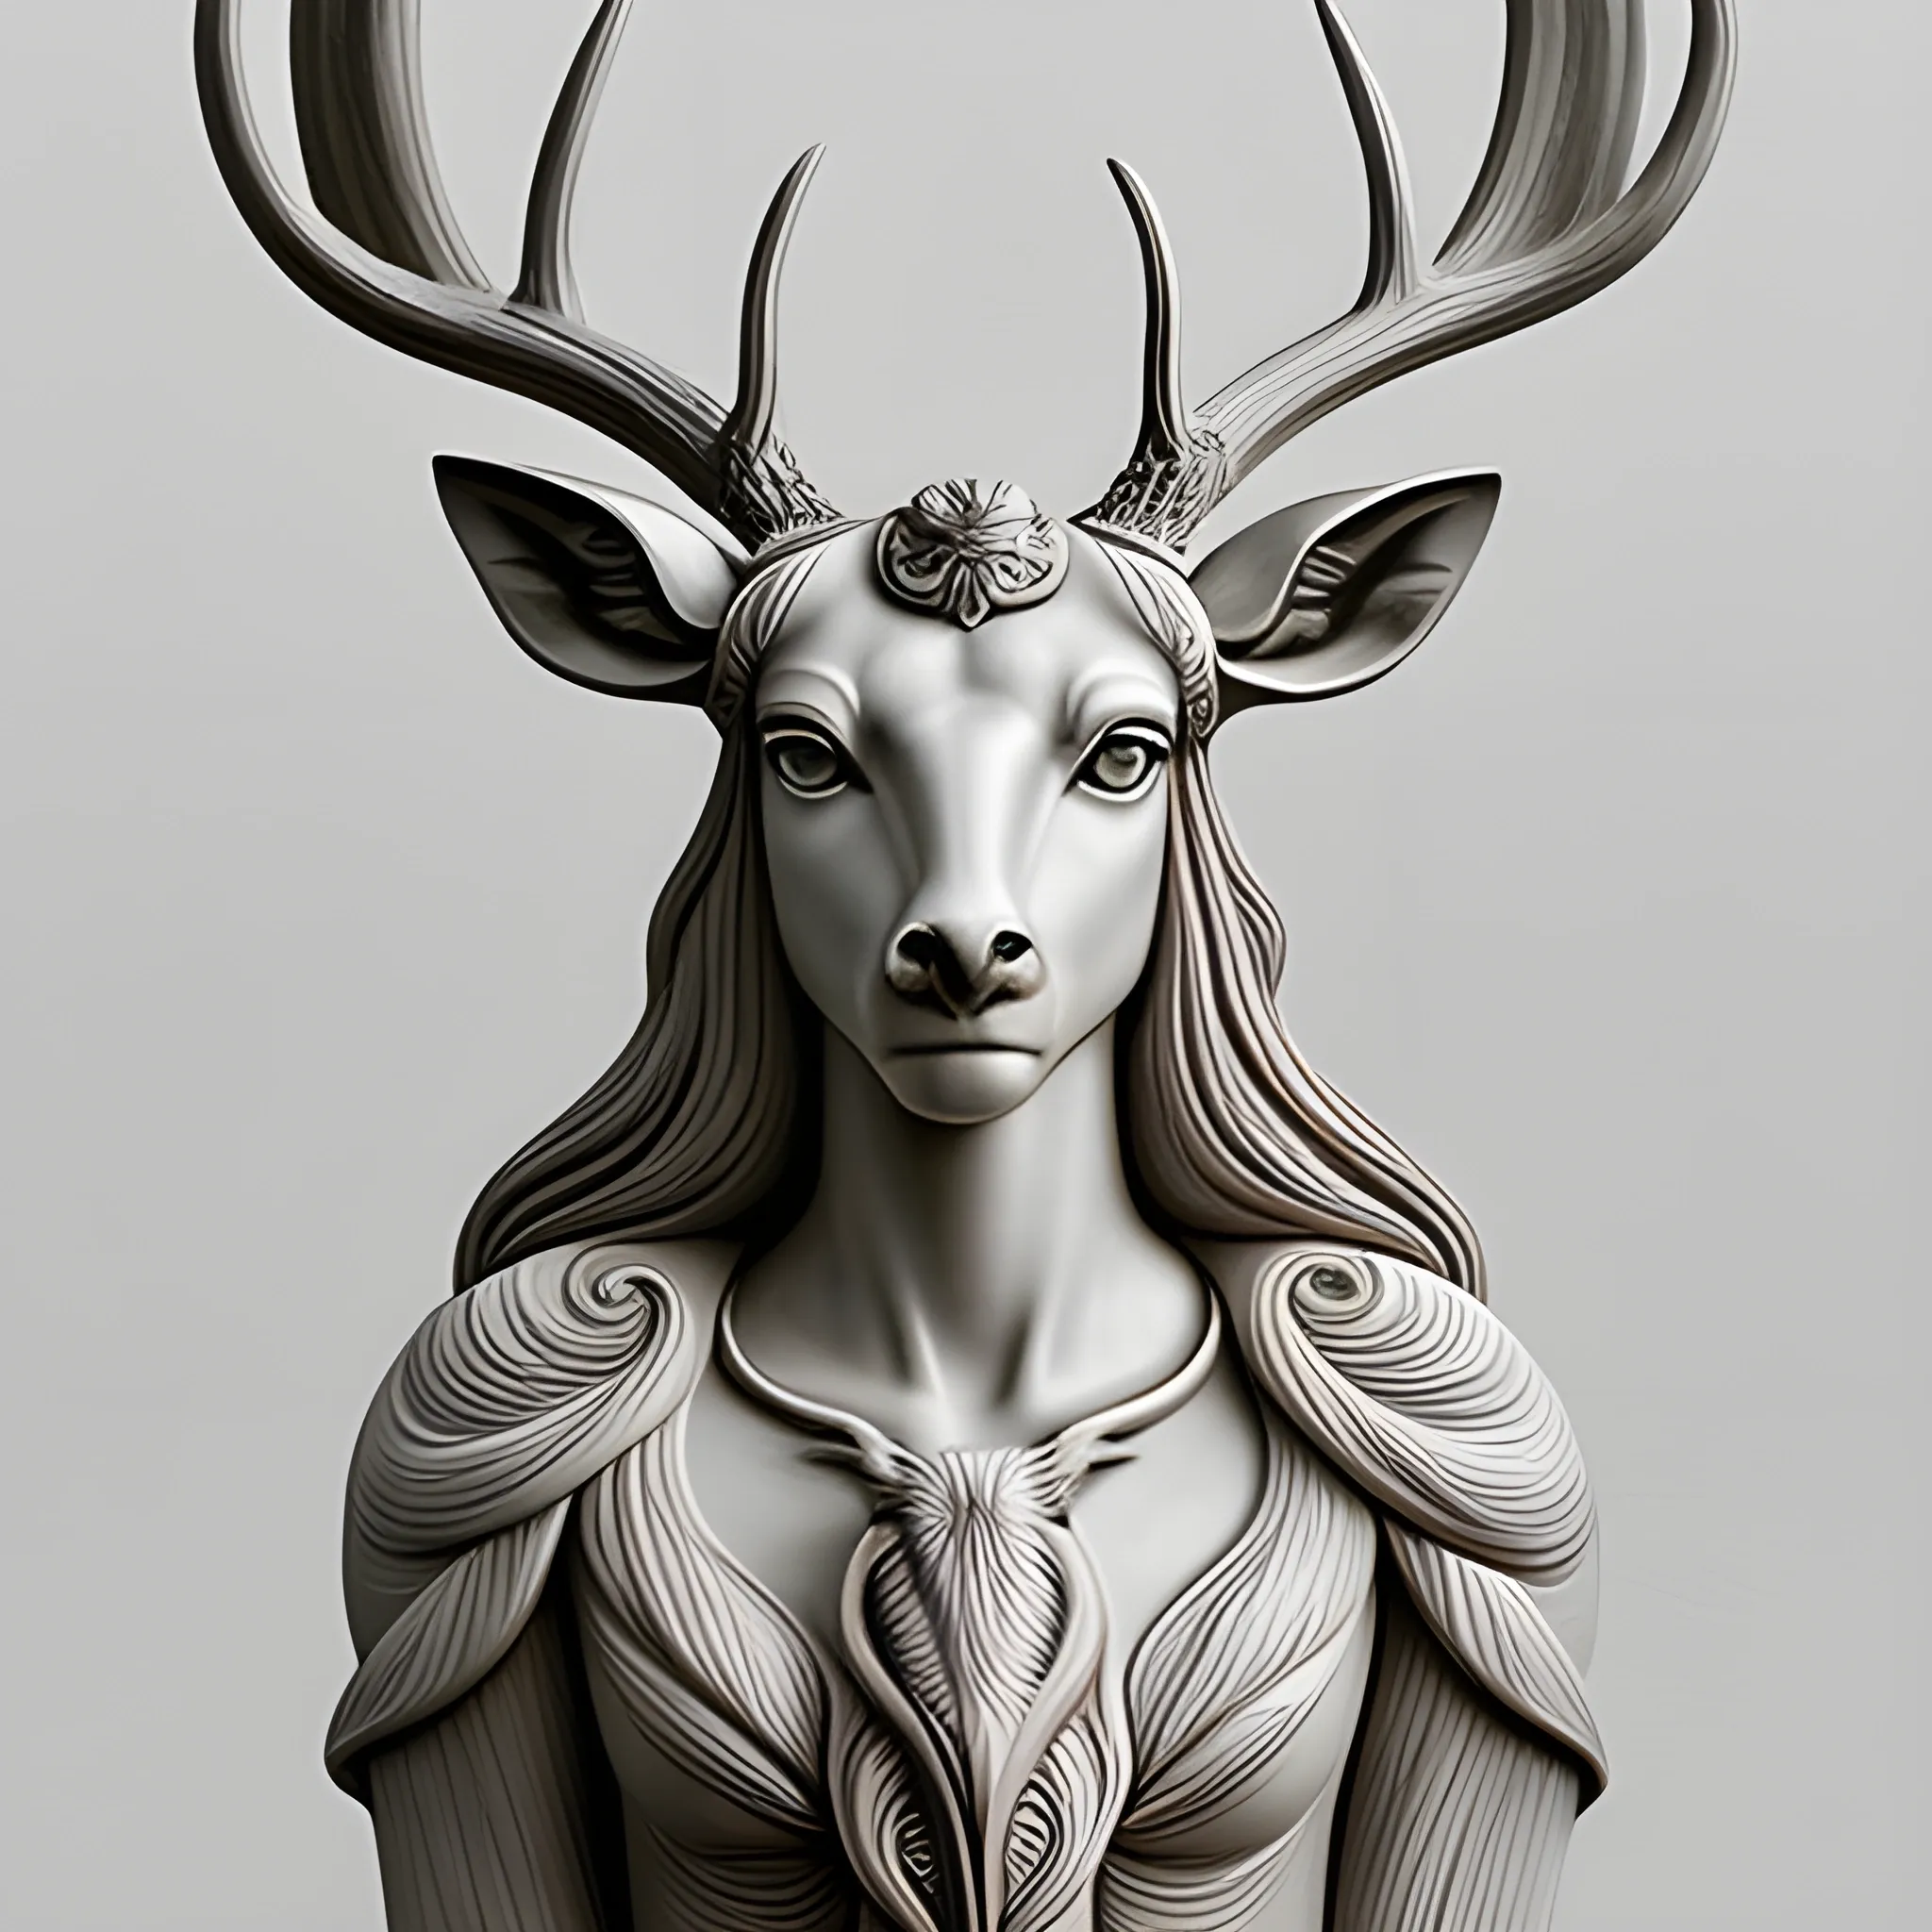 , Pencil Sketch A hyperrealistic and stylized representation that represents a female goddess of deer and plants, along with a creature that fuses the elegance of the deer with the strength of the horse, created by a prodigious contemporary sculptor of the 21st century